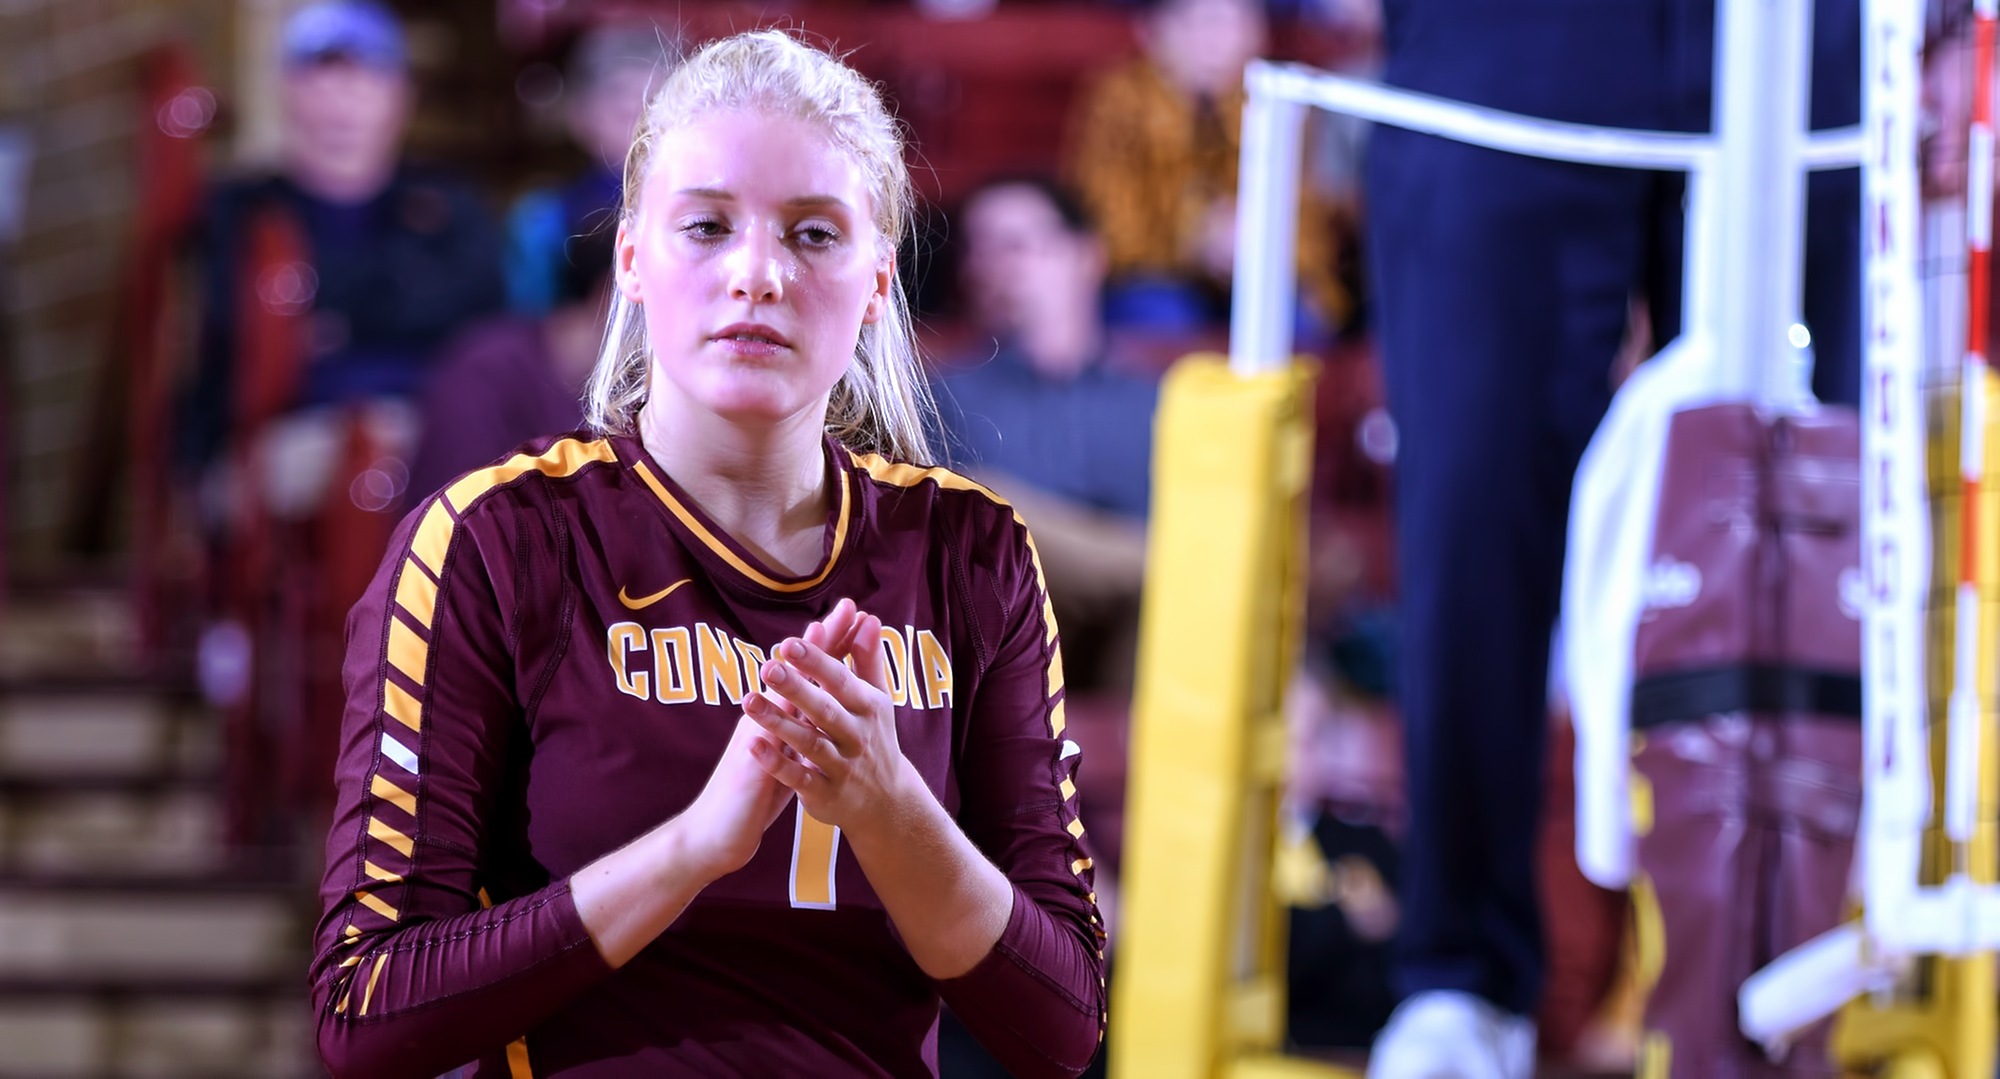 Bailey Gronner had a career-high 13 kills in the Cobbers' match at St. Mary's.